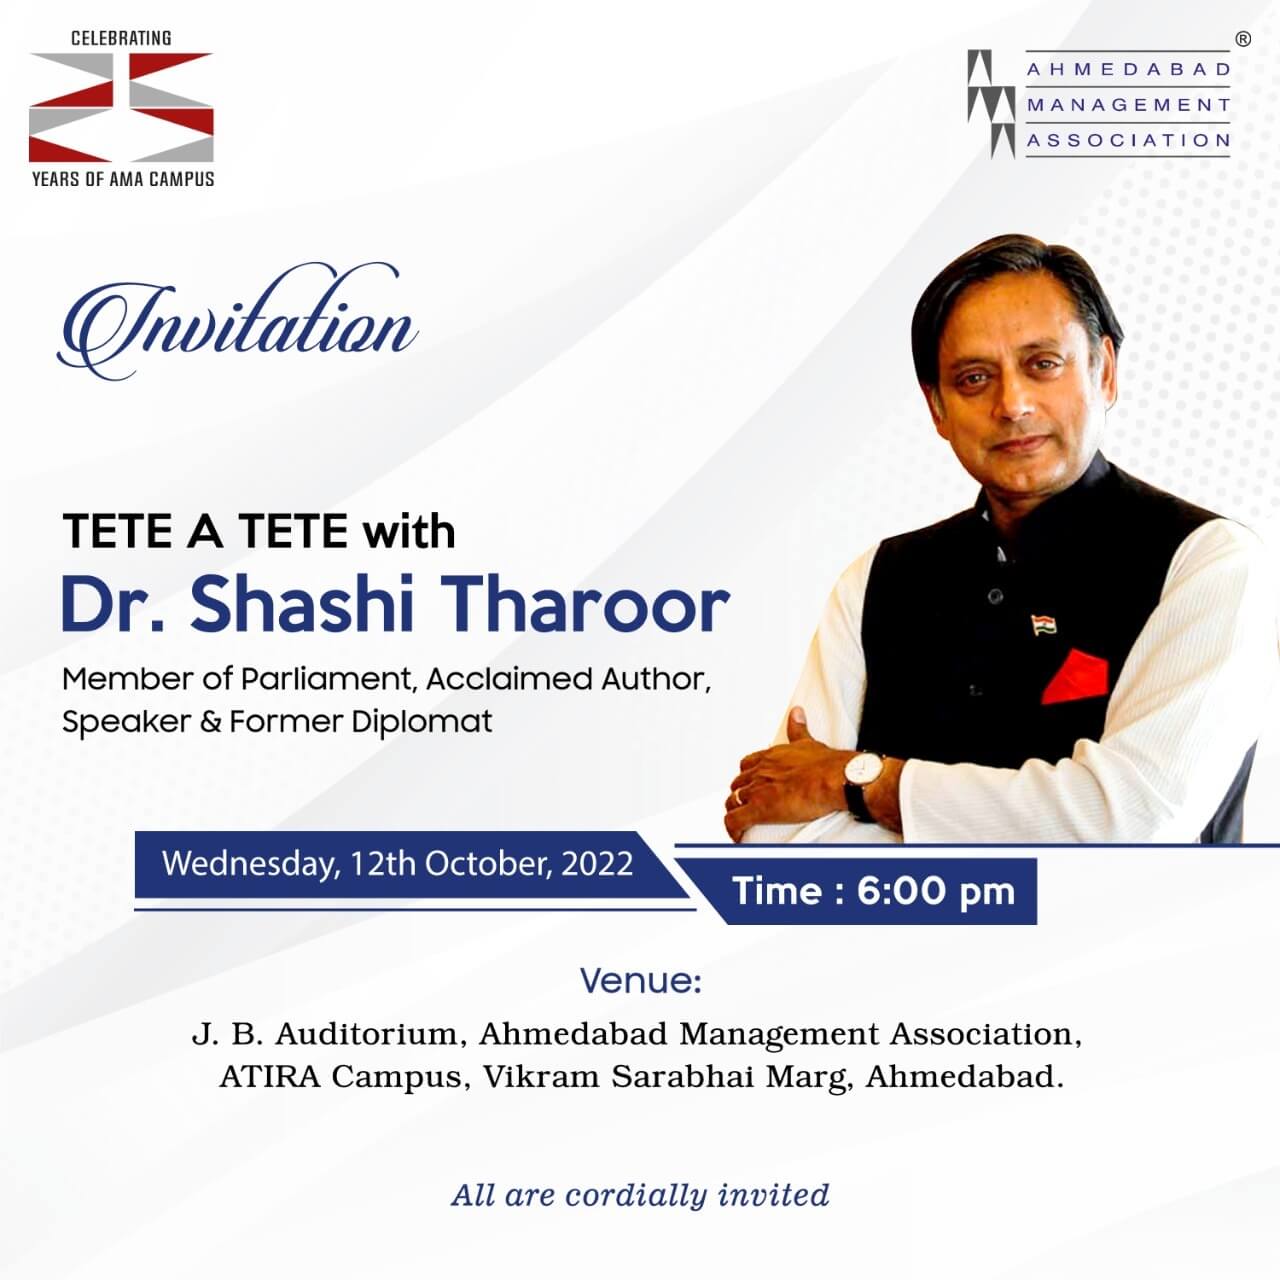 “TETE A TETE” with Dr. Shashi Tharoor Scheduled on October 12 @AMA, Ahmedabad